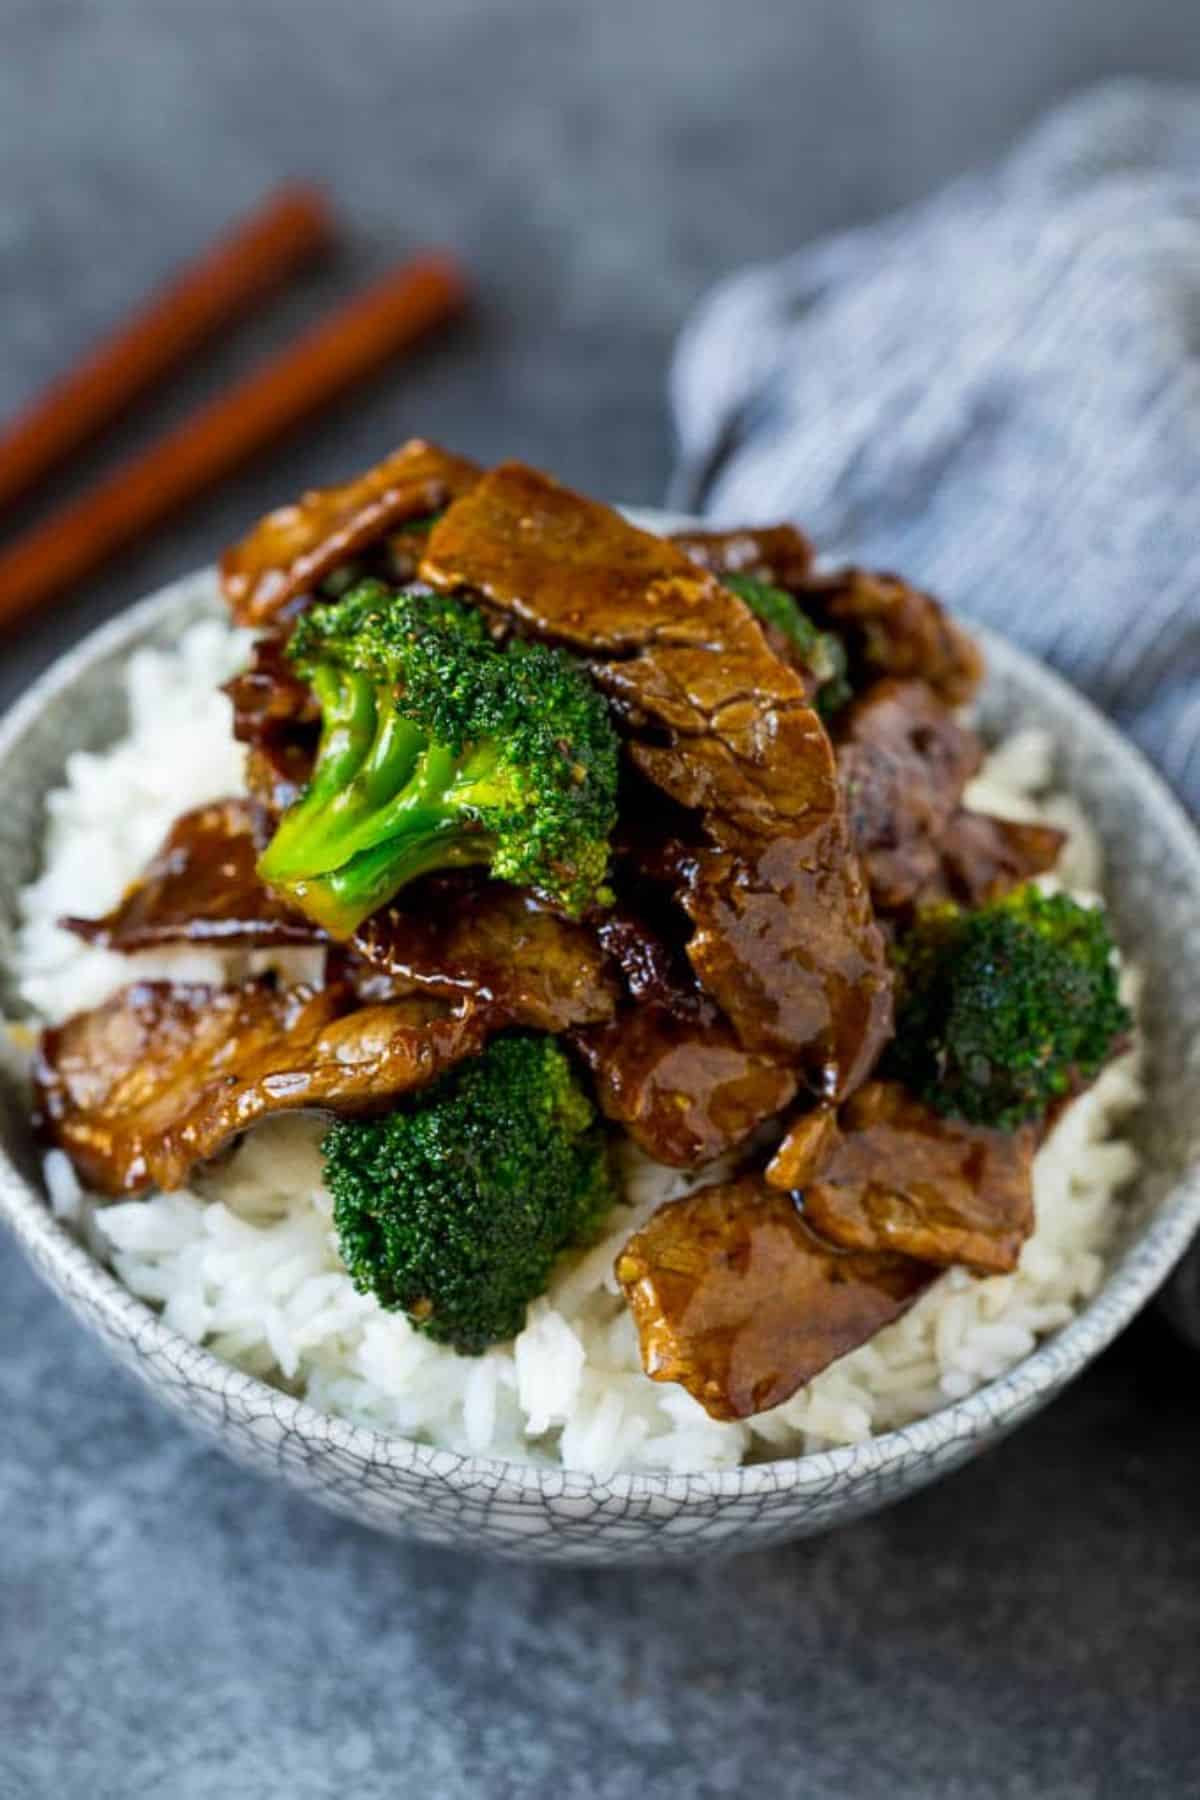 Scrumptious Beef and Broccoli Stir Fry in a bowl.